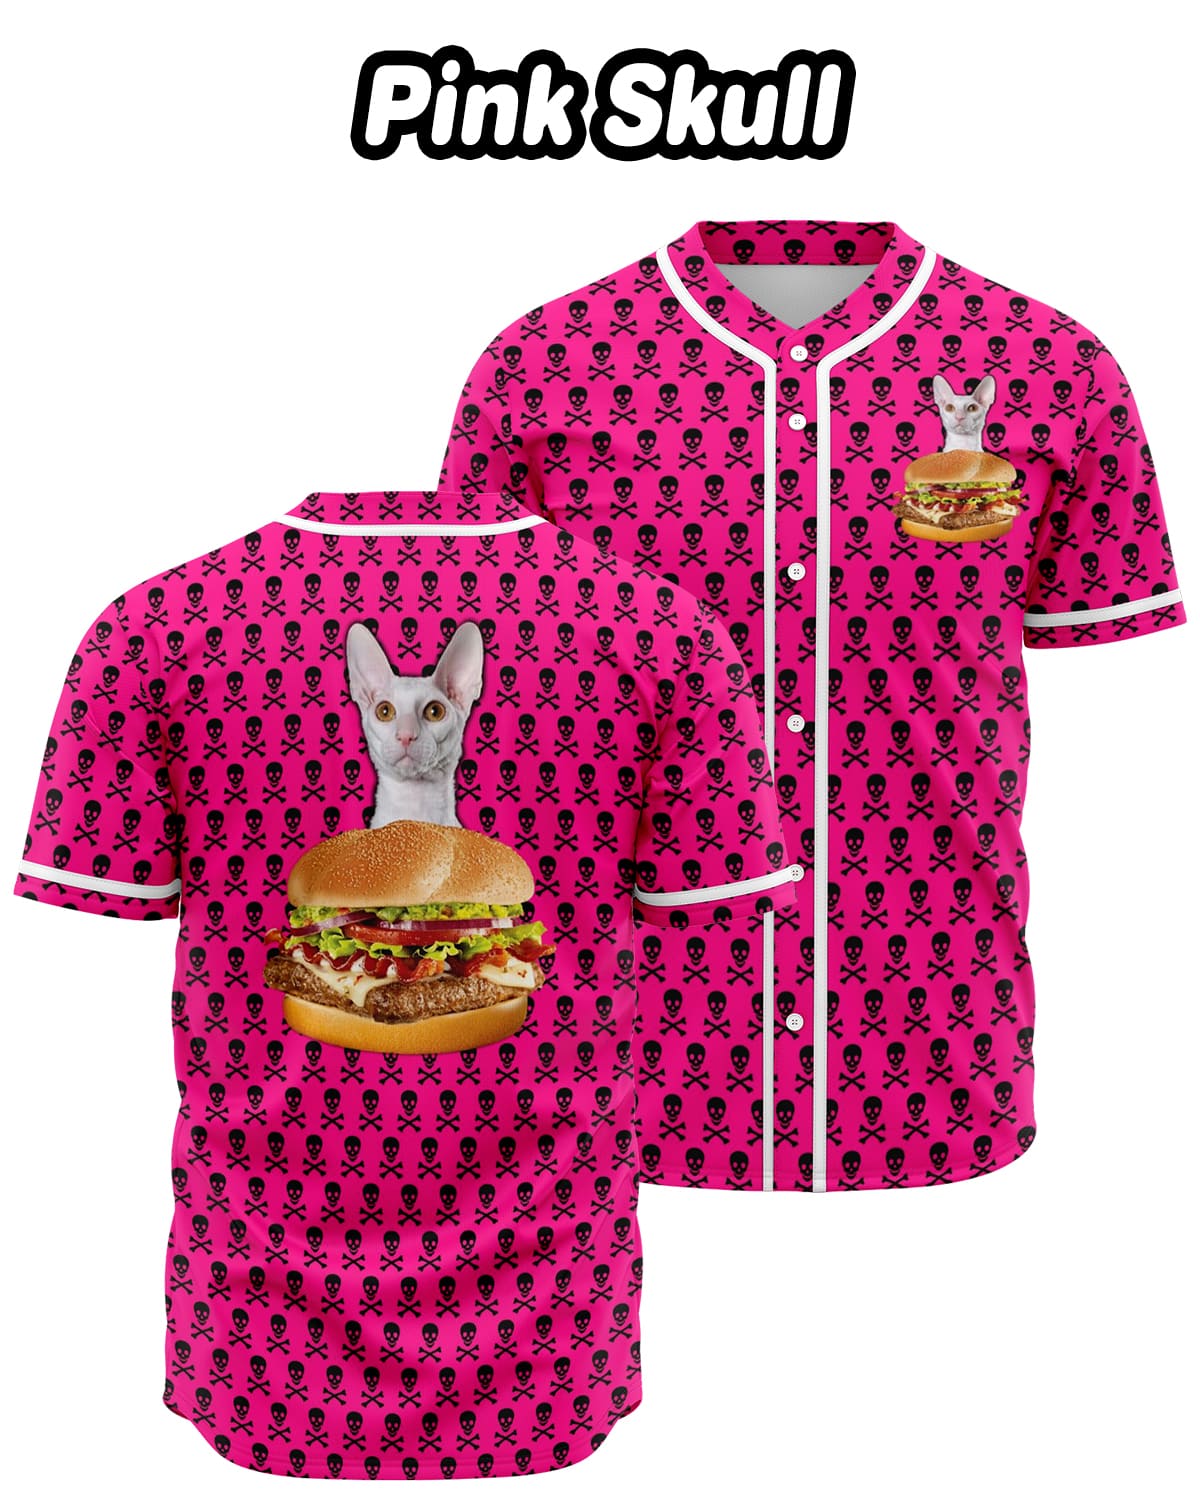 Personalized Name & Number Marie Cat Striped Pink 3D BASEBALL JERSEY  SHIRT